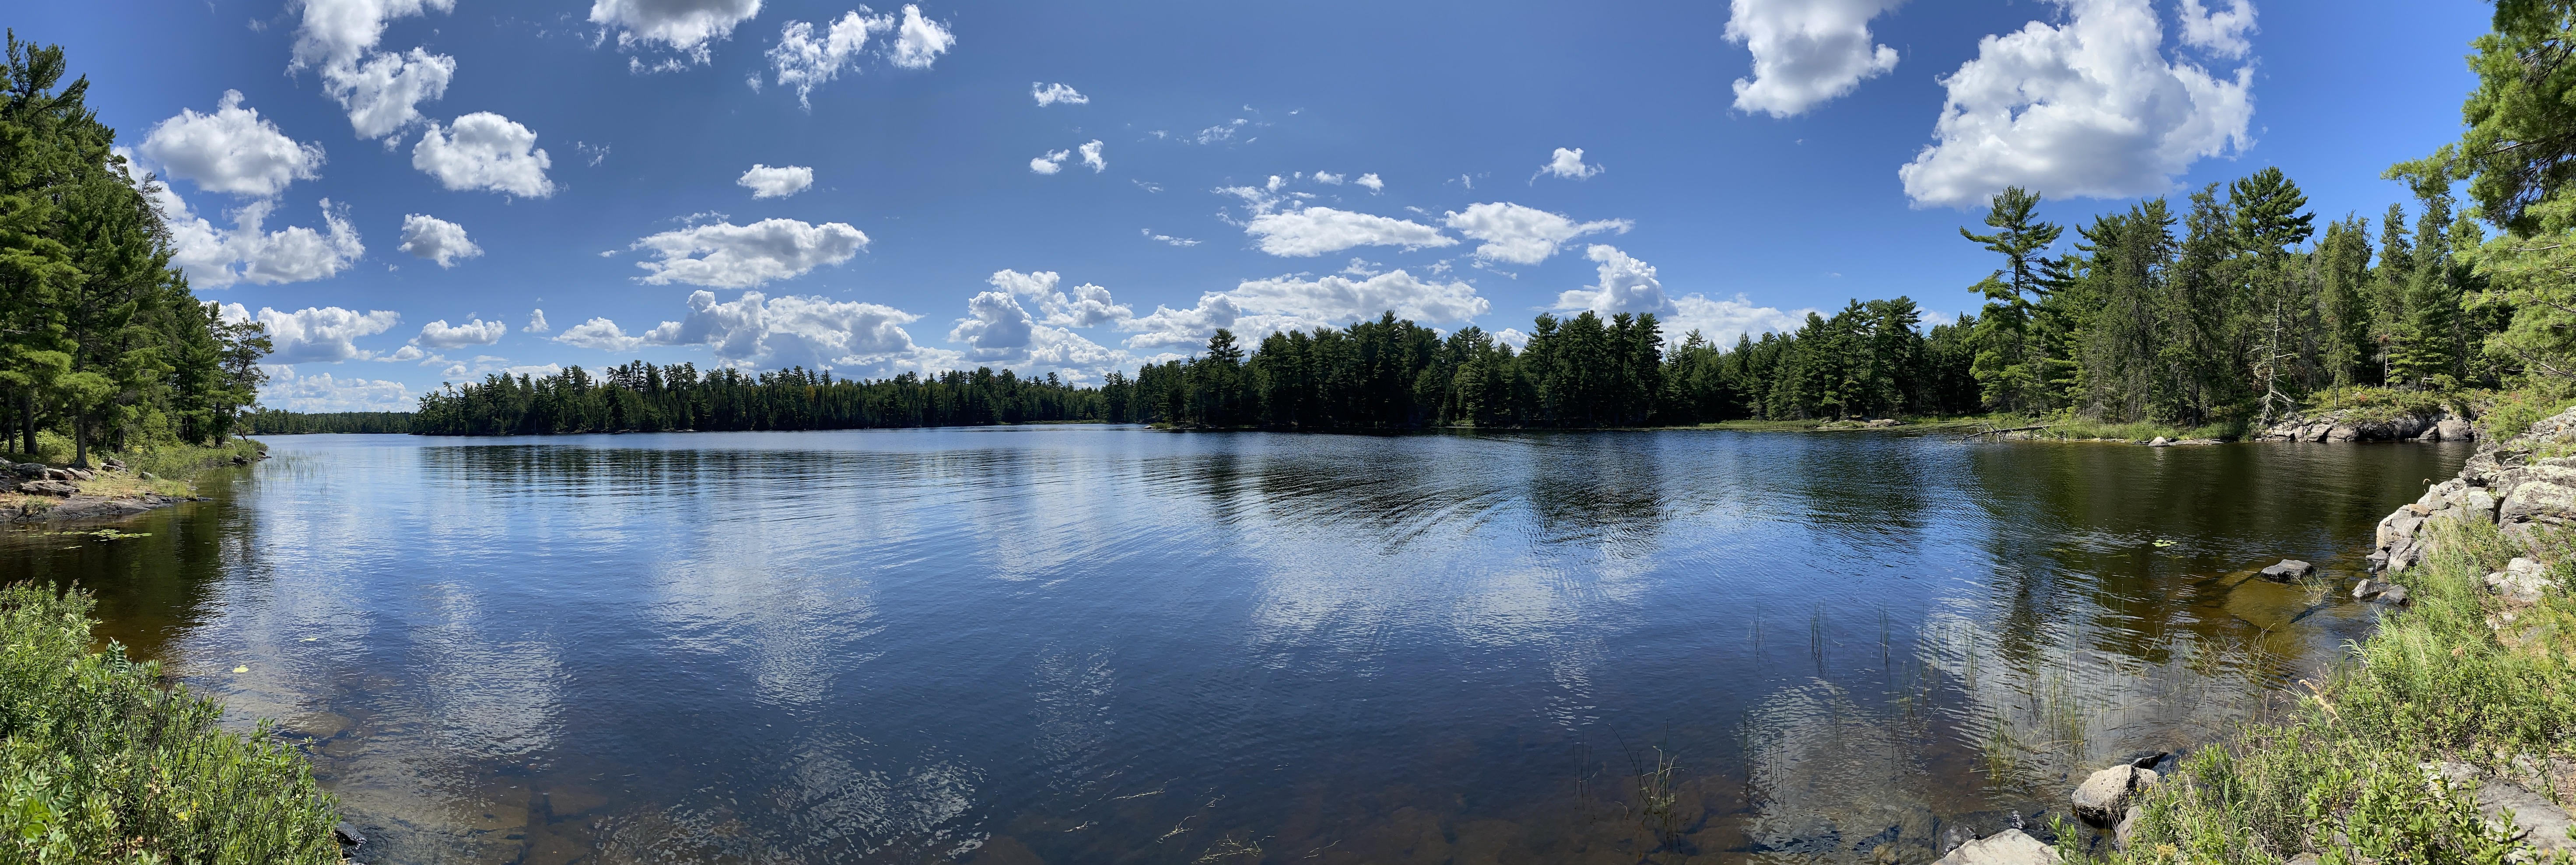 Panorama view from the houseboat site of the calm water surrounded by the tree covered shoreline.